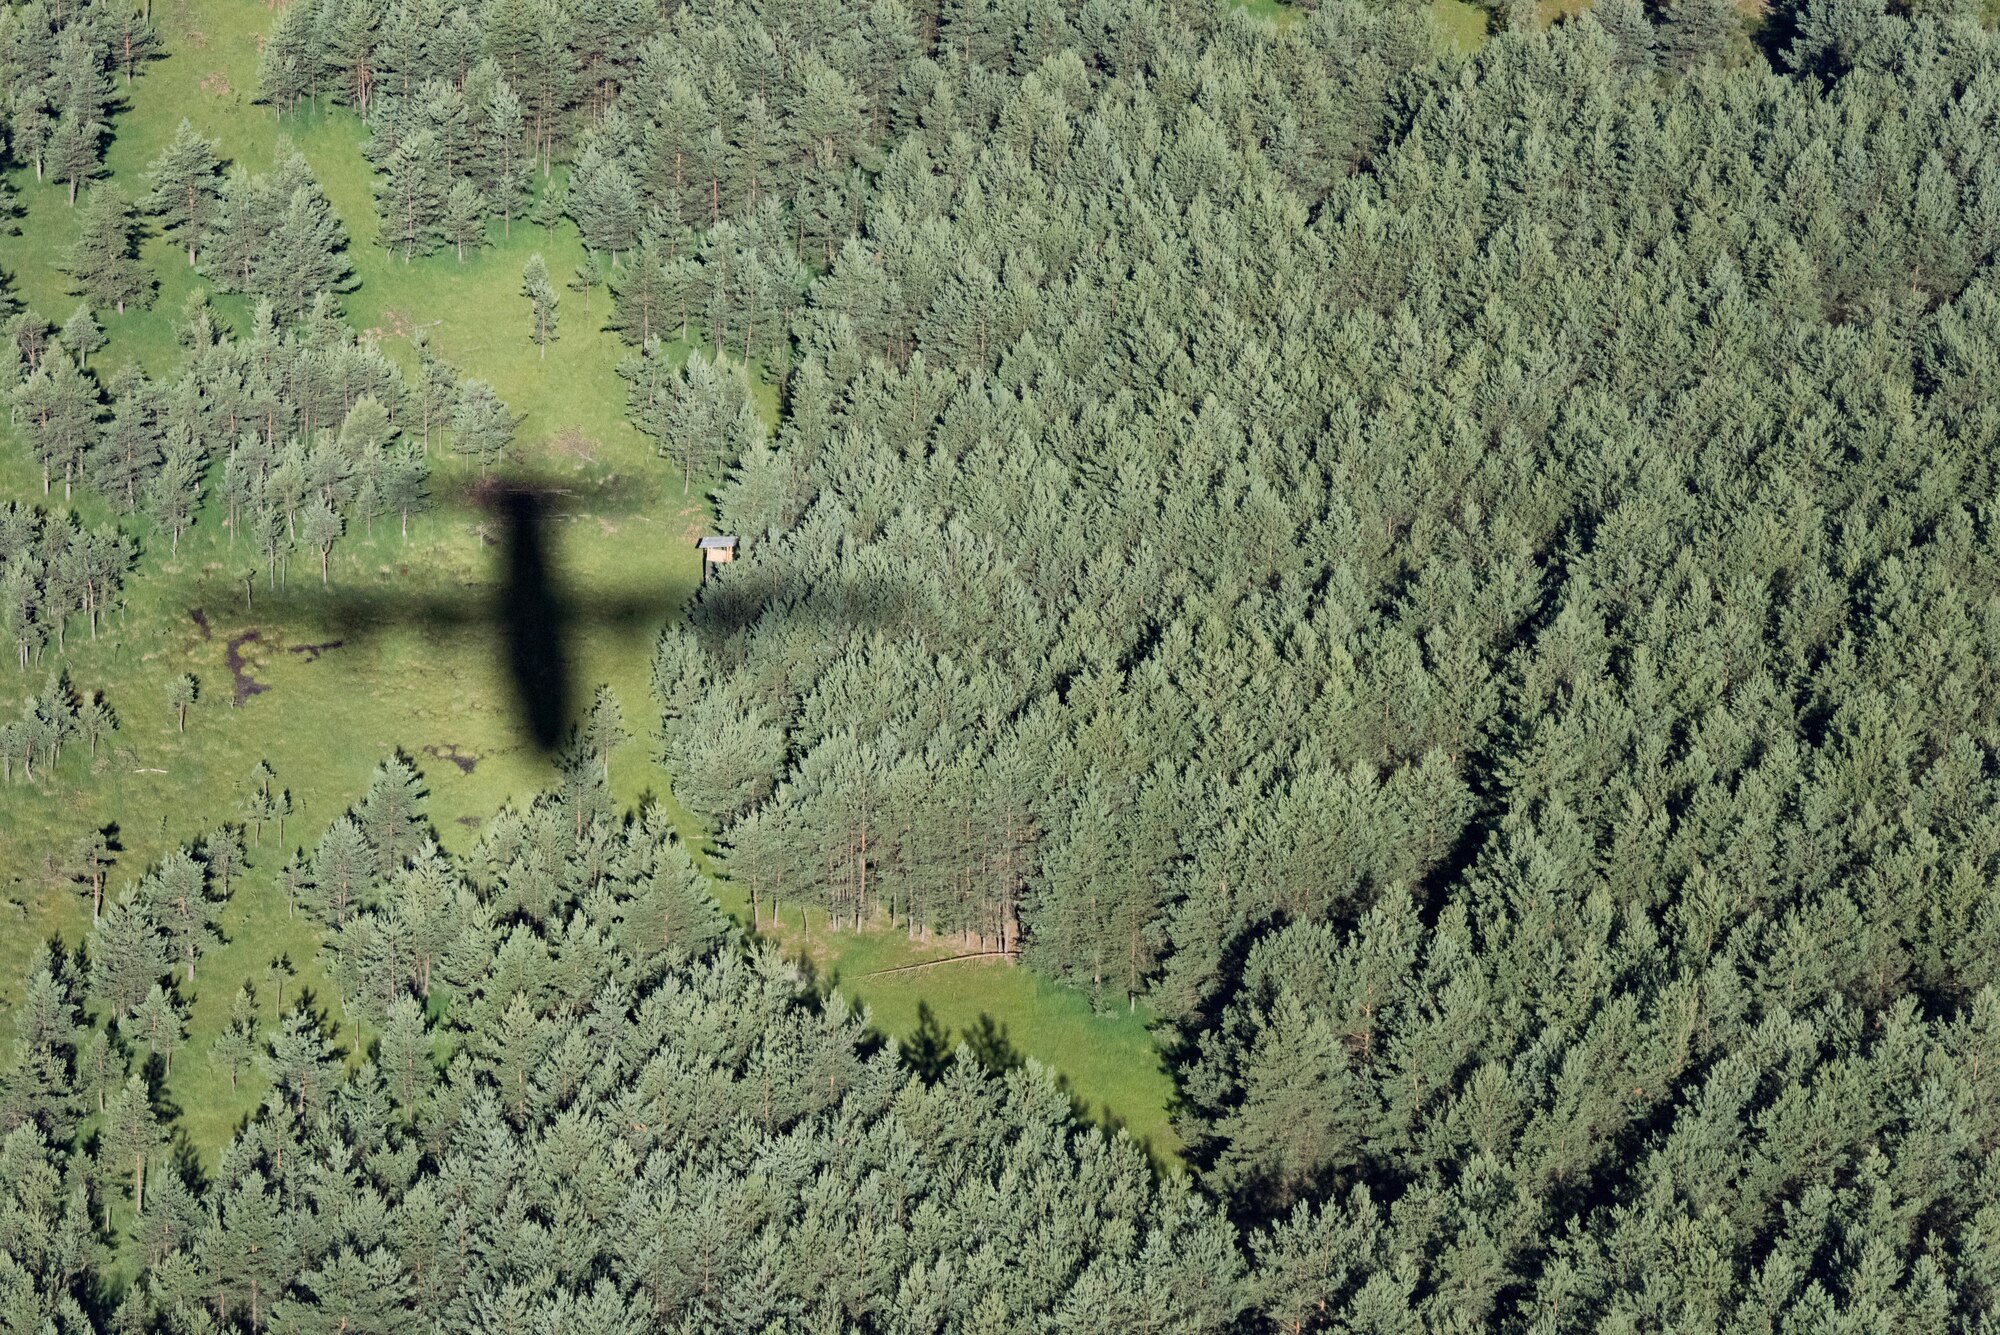 The shadow of a C-130J Super Hercules flies over the dense woods of Germany, July 2, 2018. This particular C-130J led the formation during an exercise that involved four other C-130Js. Once the pilots have led a formation long enough, they are recognized as multi-element flight lead qualified pilots. Multi-element flight lead qualified pilots help ensure the 37th Airlift Squadron is prepared to accomplish one of its primary missions: aerial delivery and mass on the drop-zone.